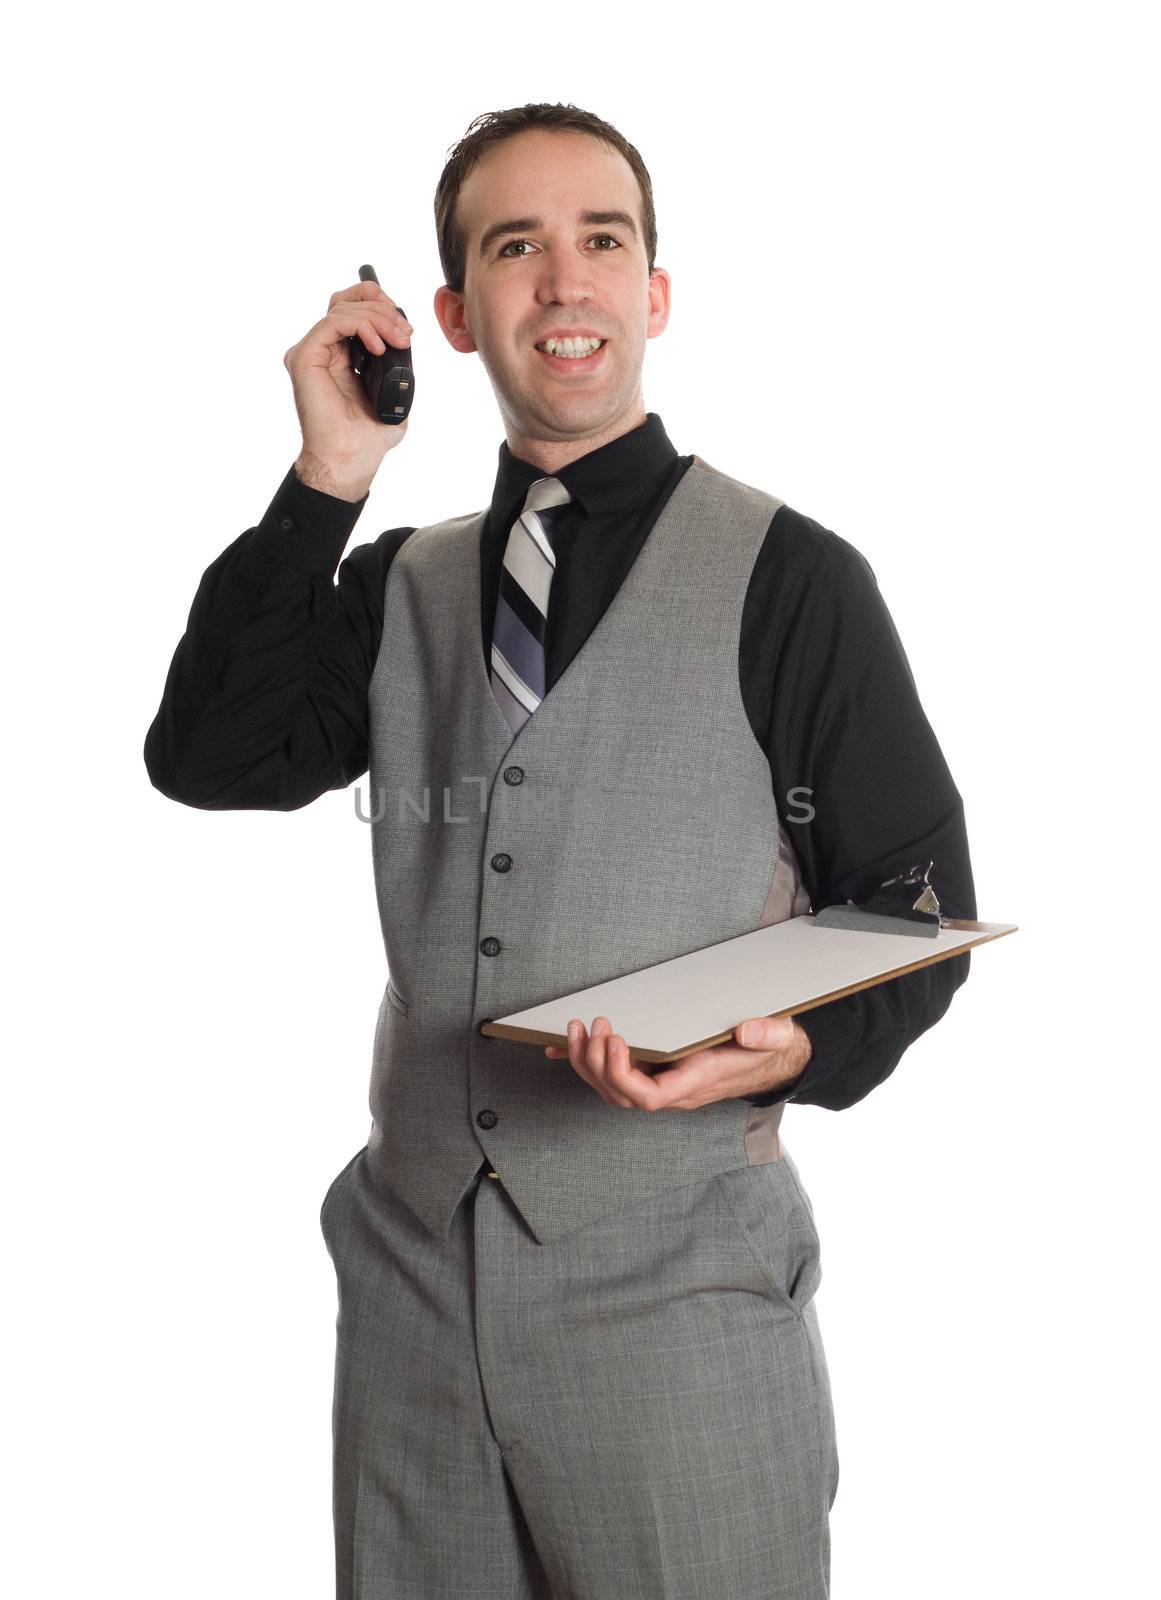 A young man wearing a suit and communicating on a walkie-talkie and holding a clipboard, isolated against a white background